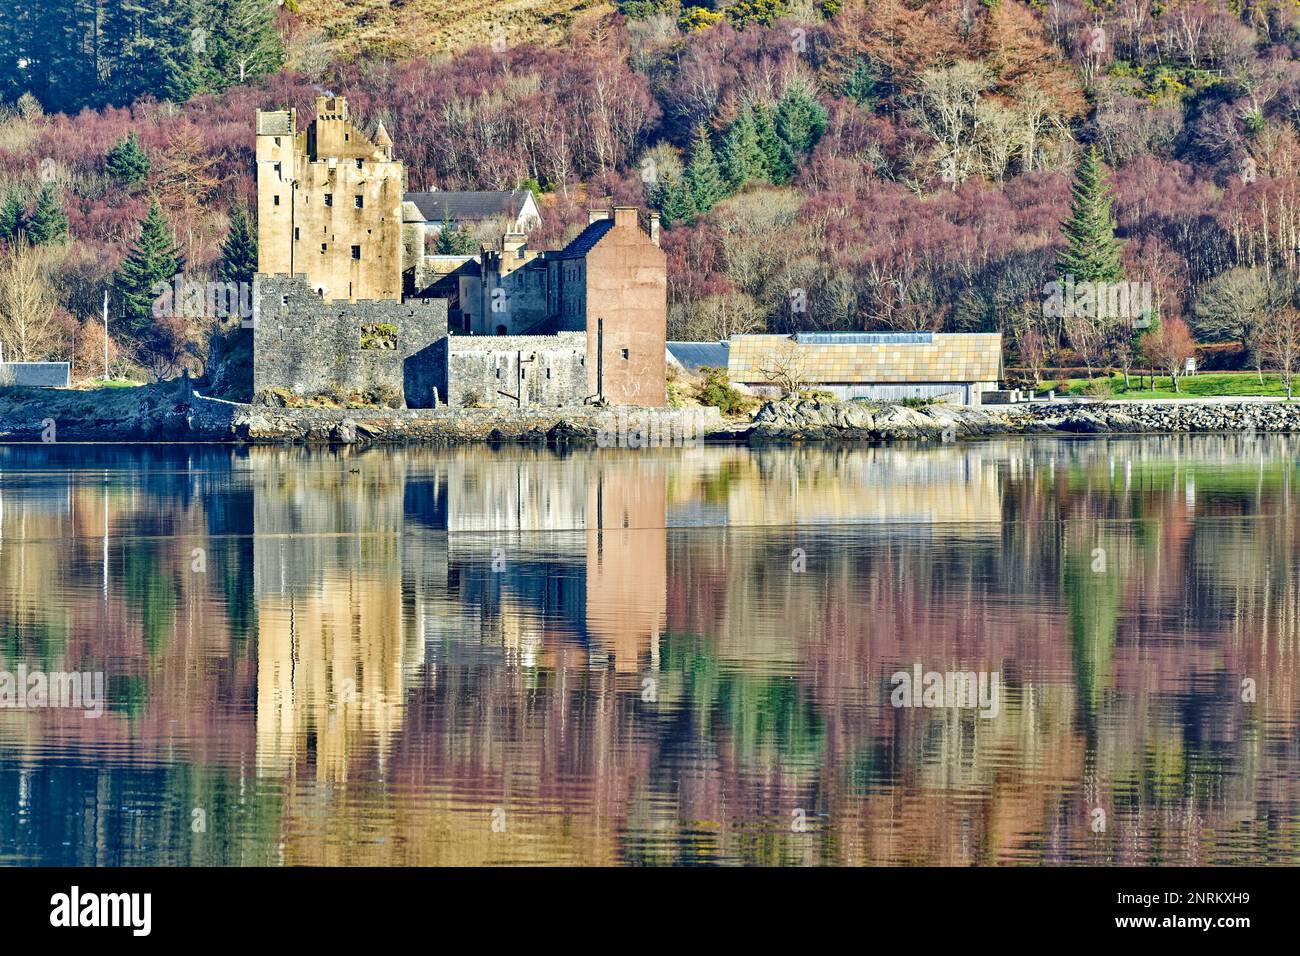 Eilean Donan Castle Loch Duich Scotland the colours of the castle and birch trees reflected in the sea loch Stock Photo